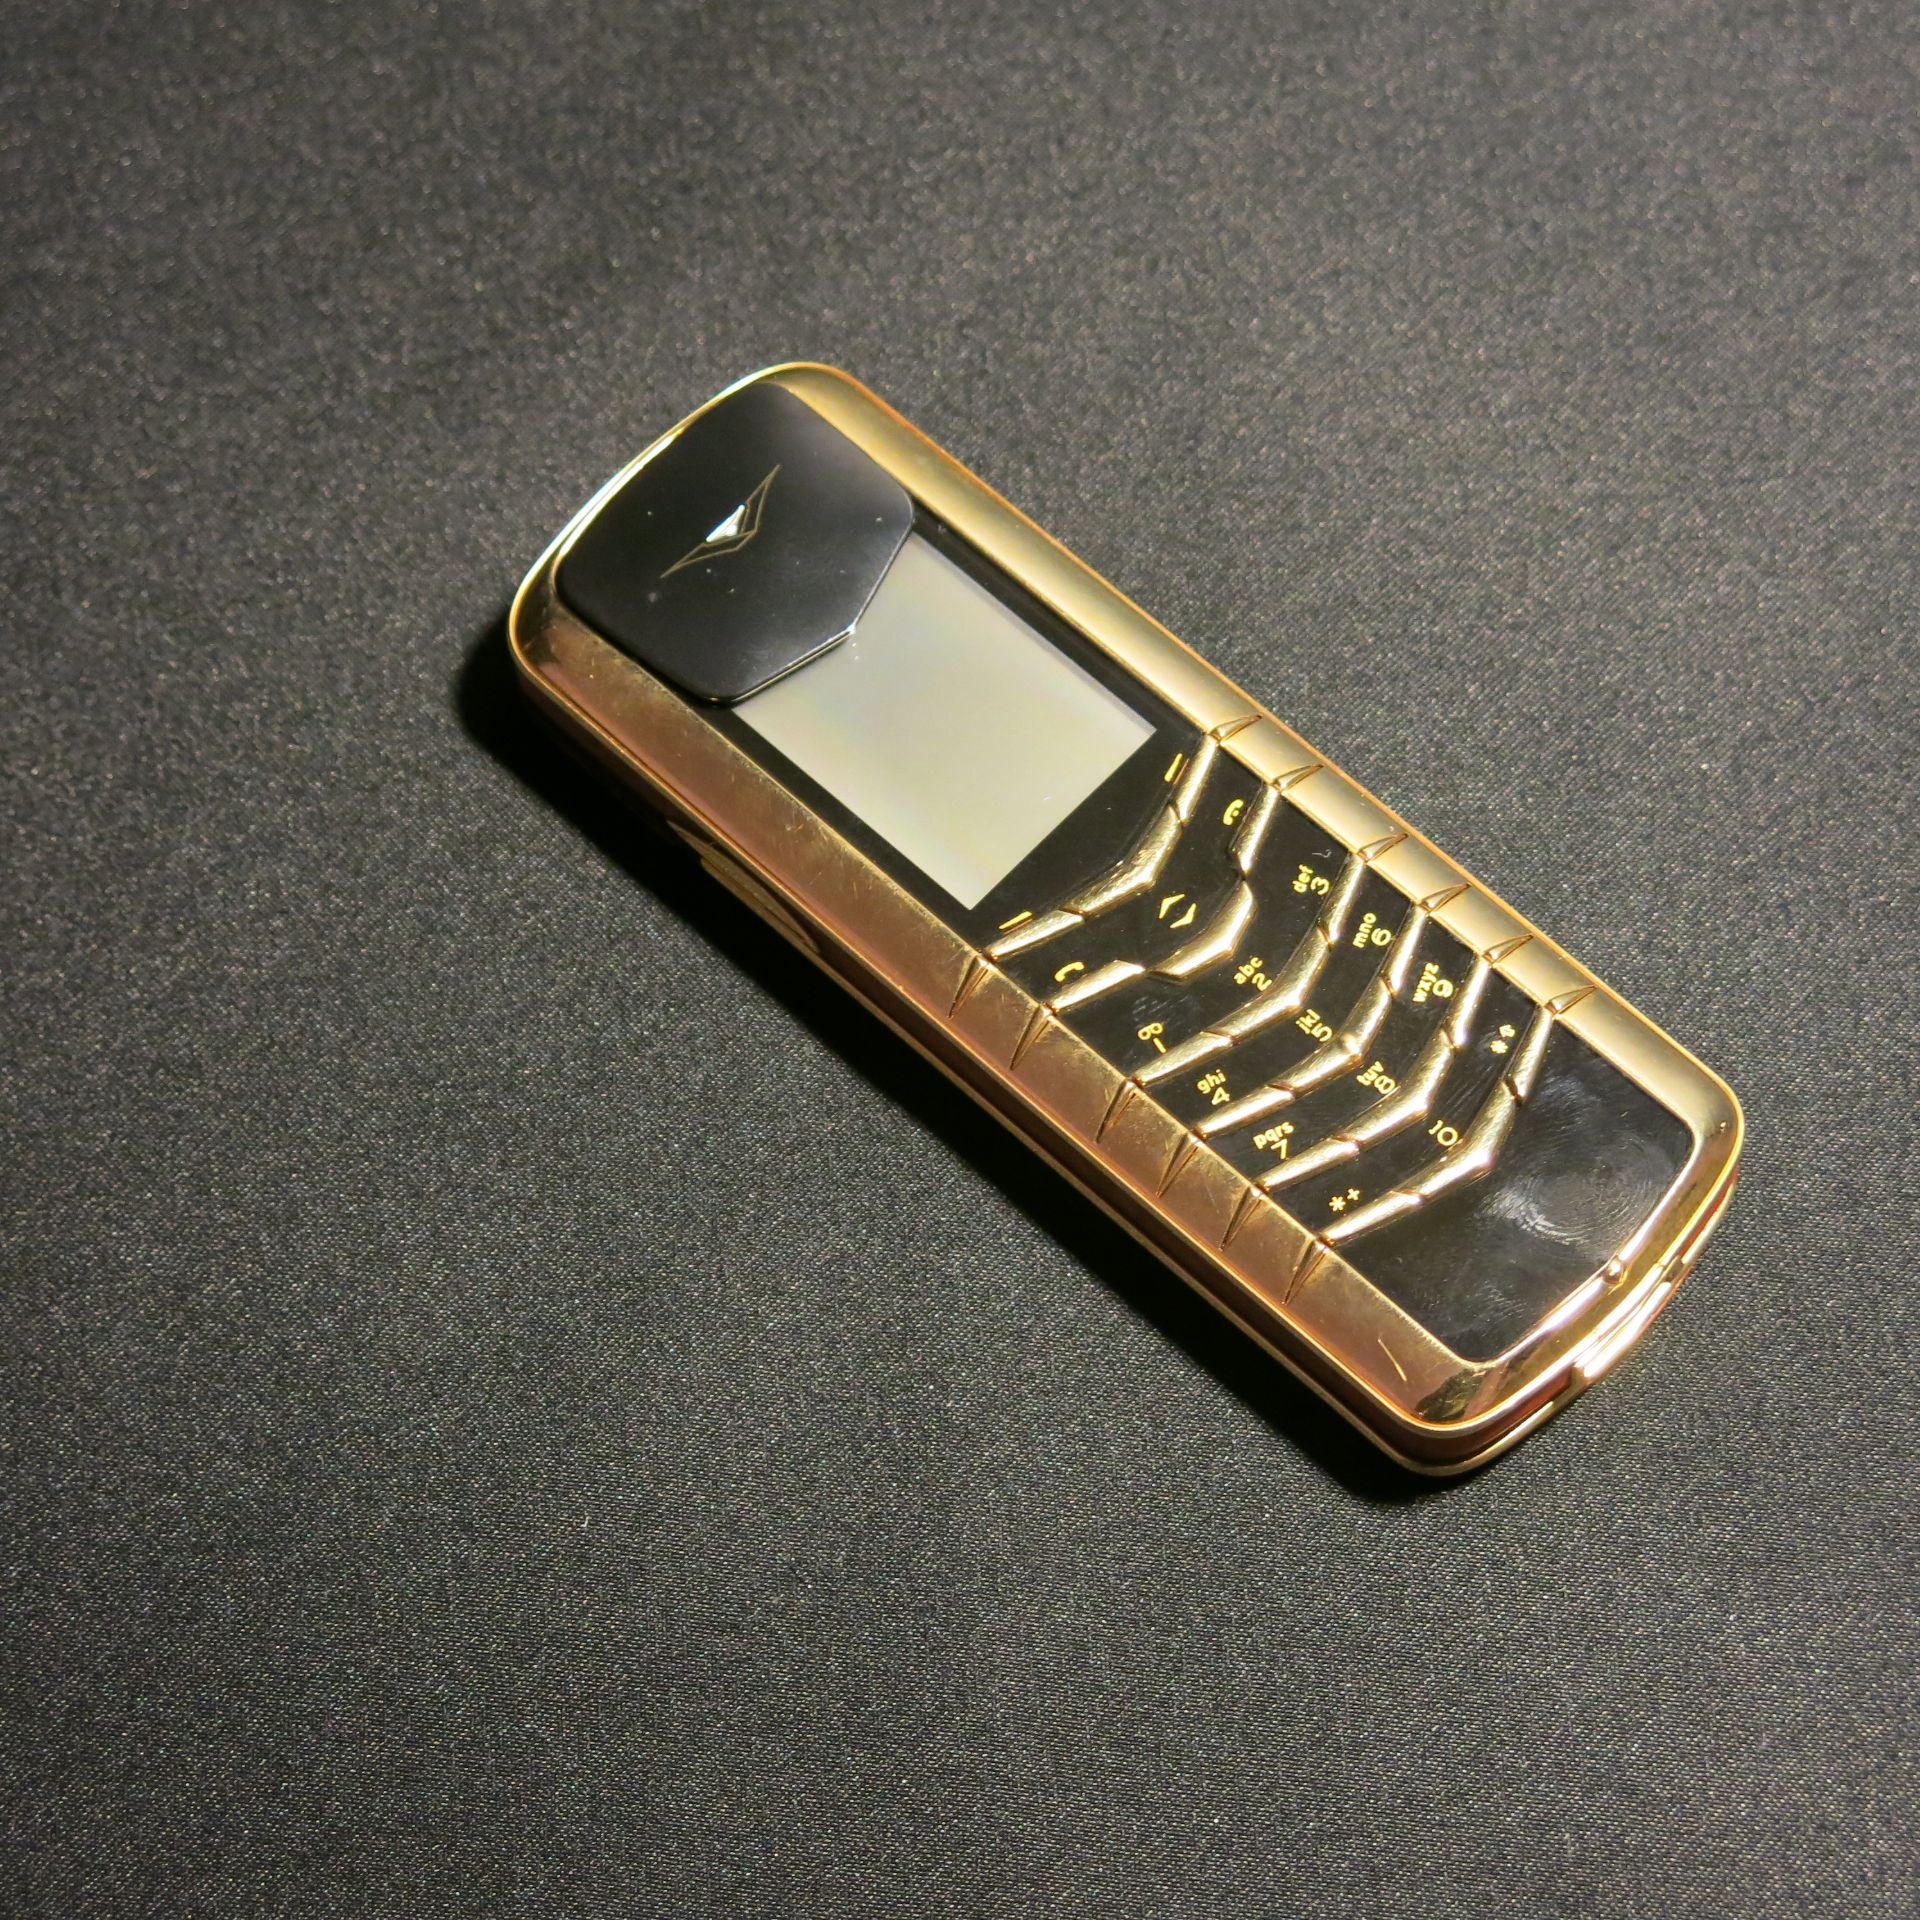 Entire Contents of the VERTU Museum Collection to Include: 105 Various Iconic Phones & Appearance - Image 71 of 106